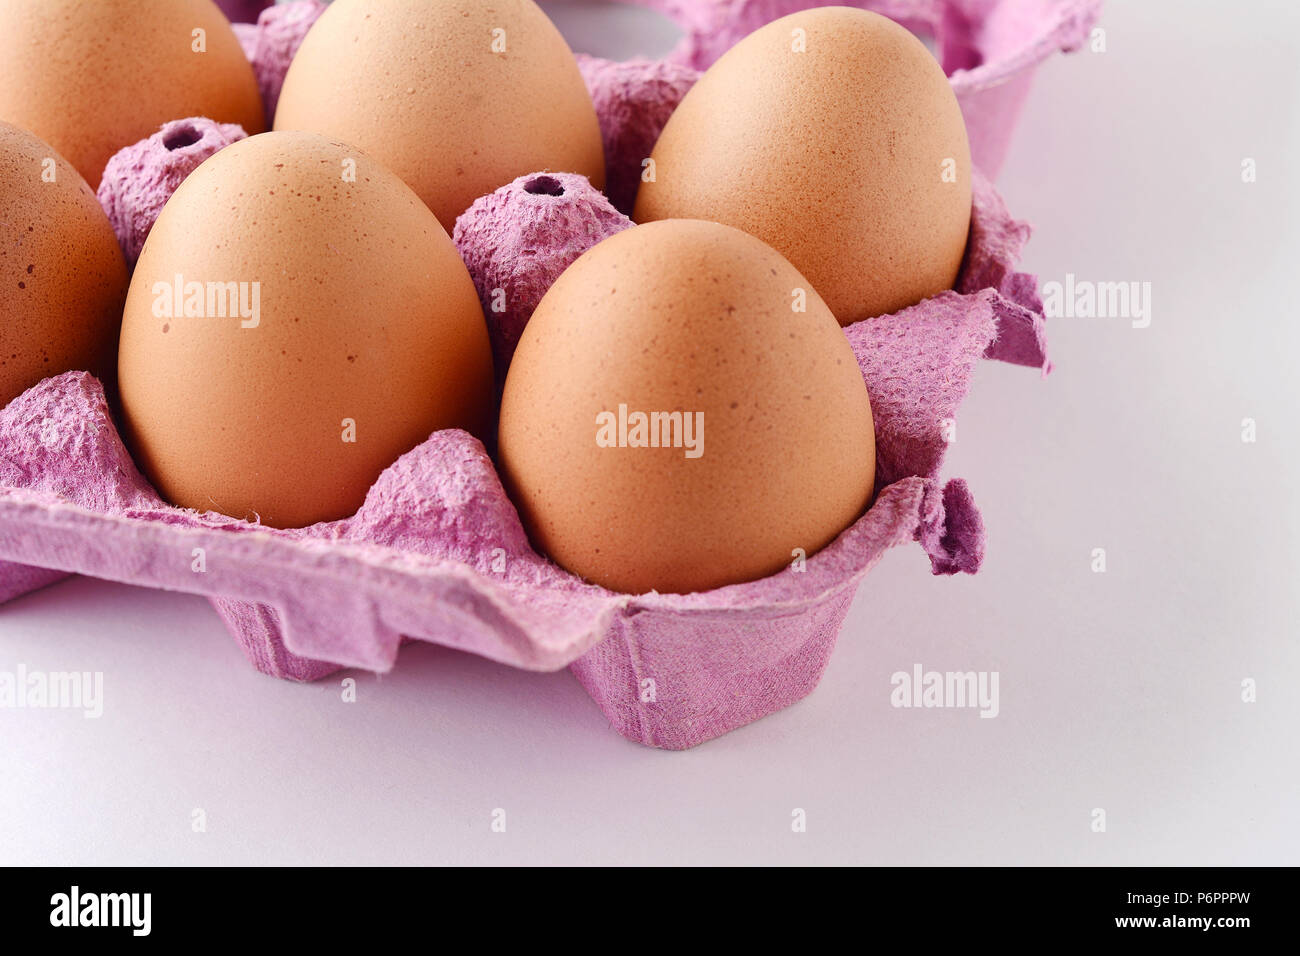 Top view of six brown eggs on box. Fresh food concept. White background Stock Photo